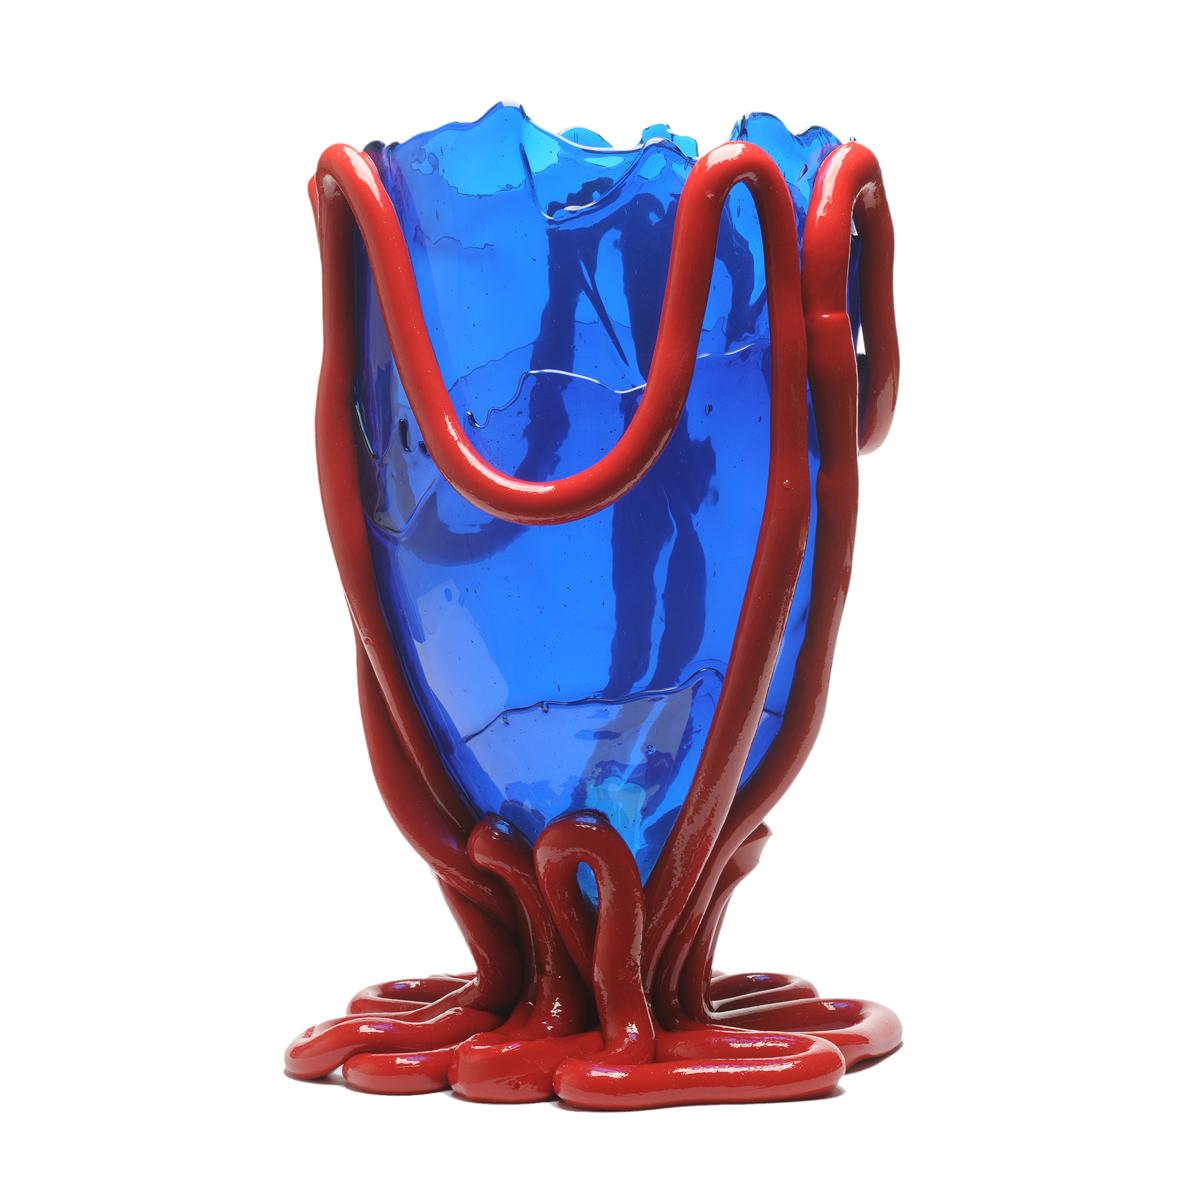 Italian Contemporary Gaetano Pesce Indian Summer XL Vase Soft Resin Blue Red For Sale